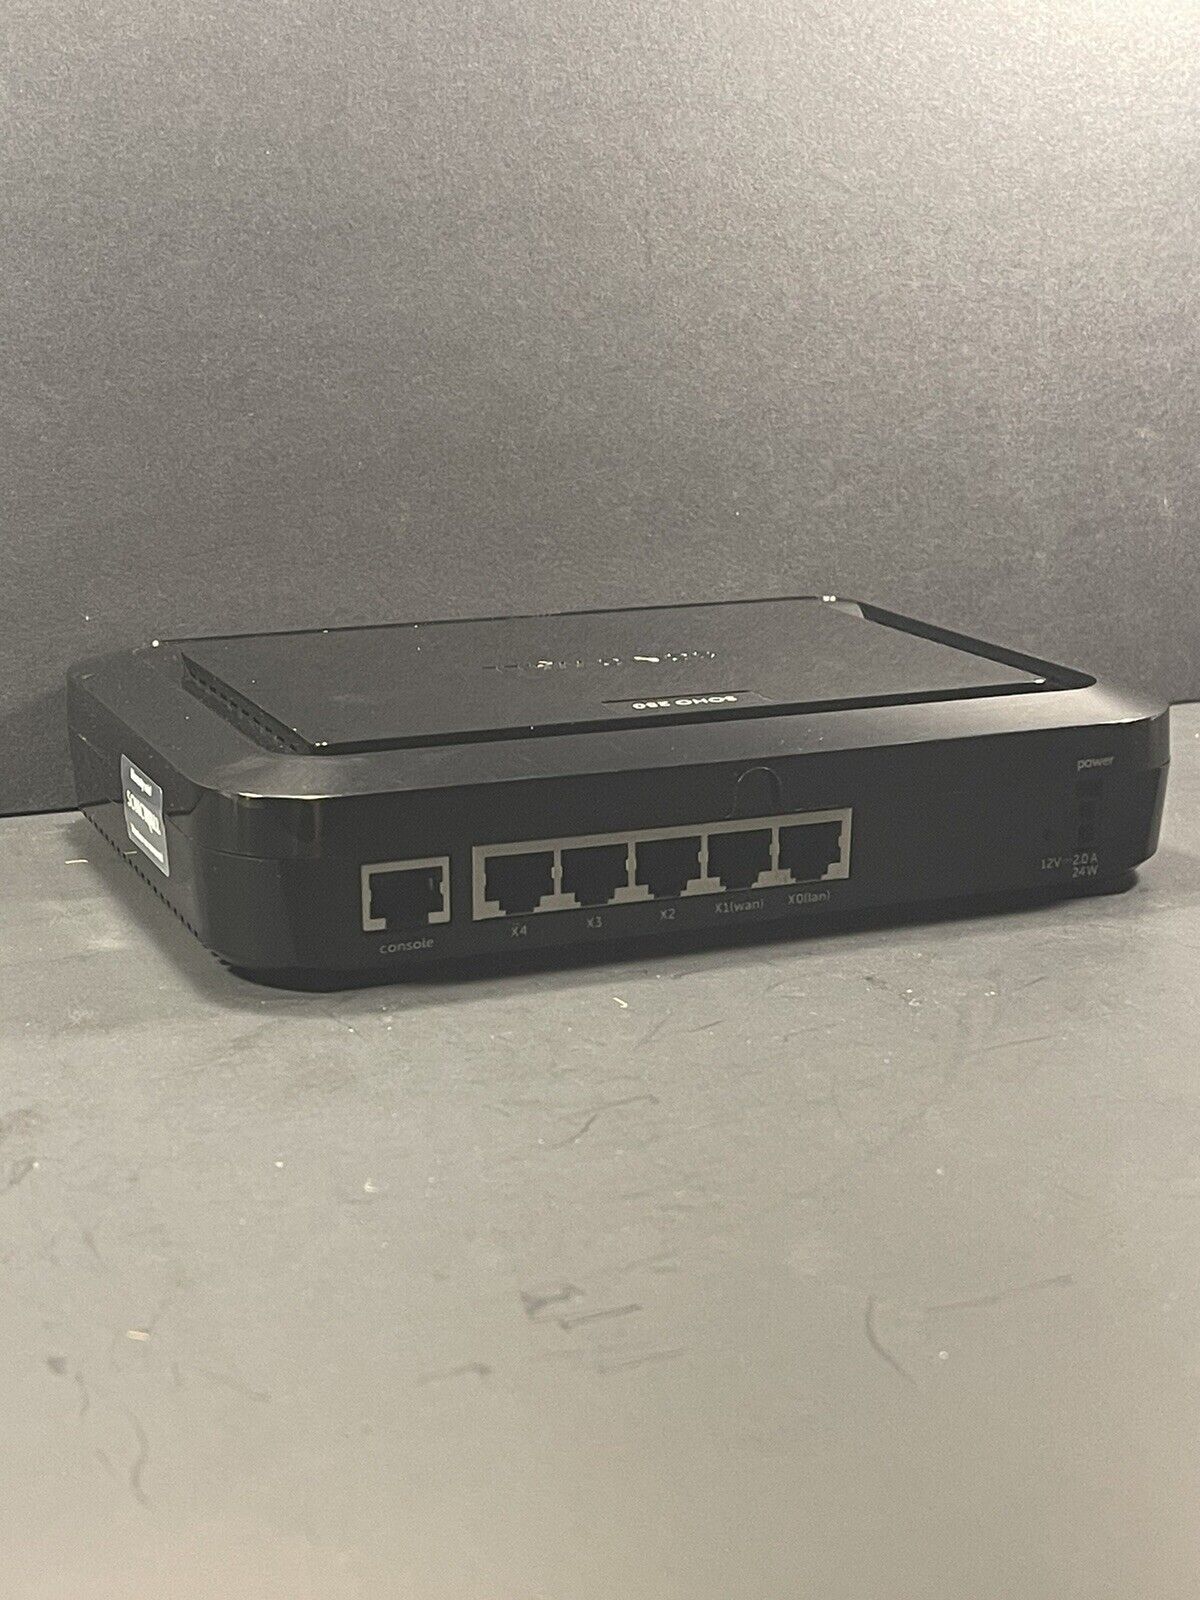 SonicWall SOHO 250 apl41-0d6